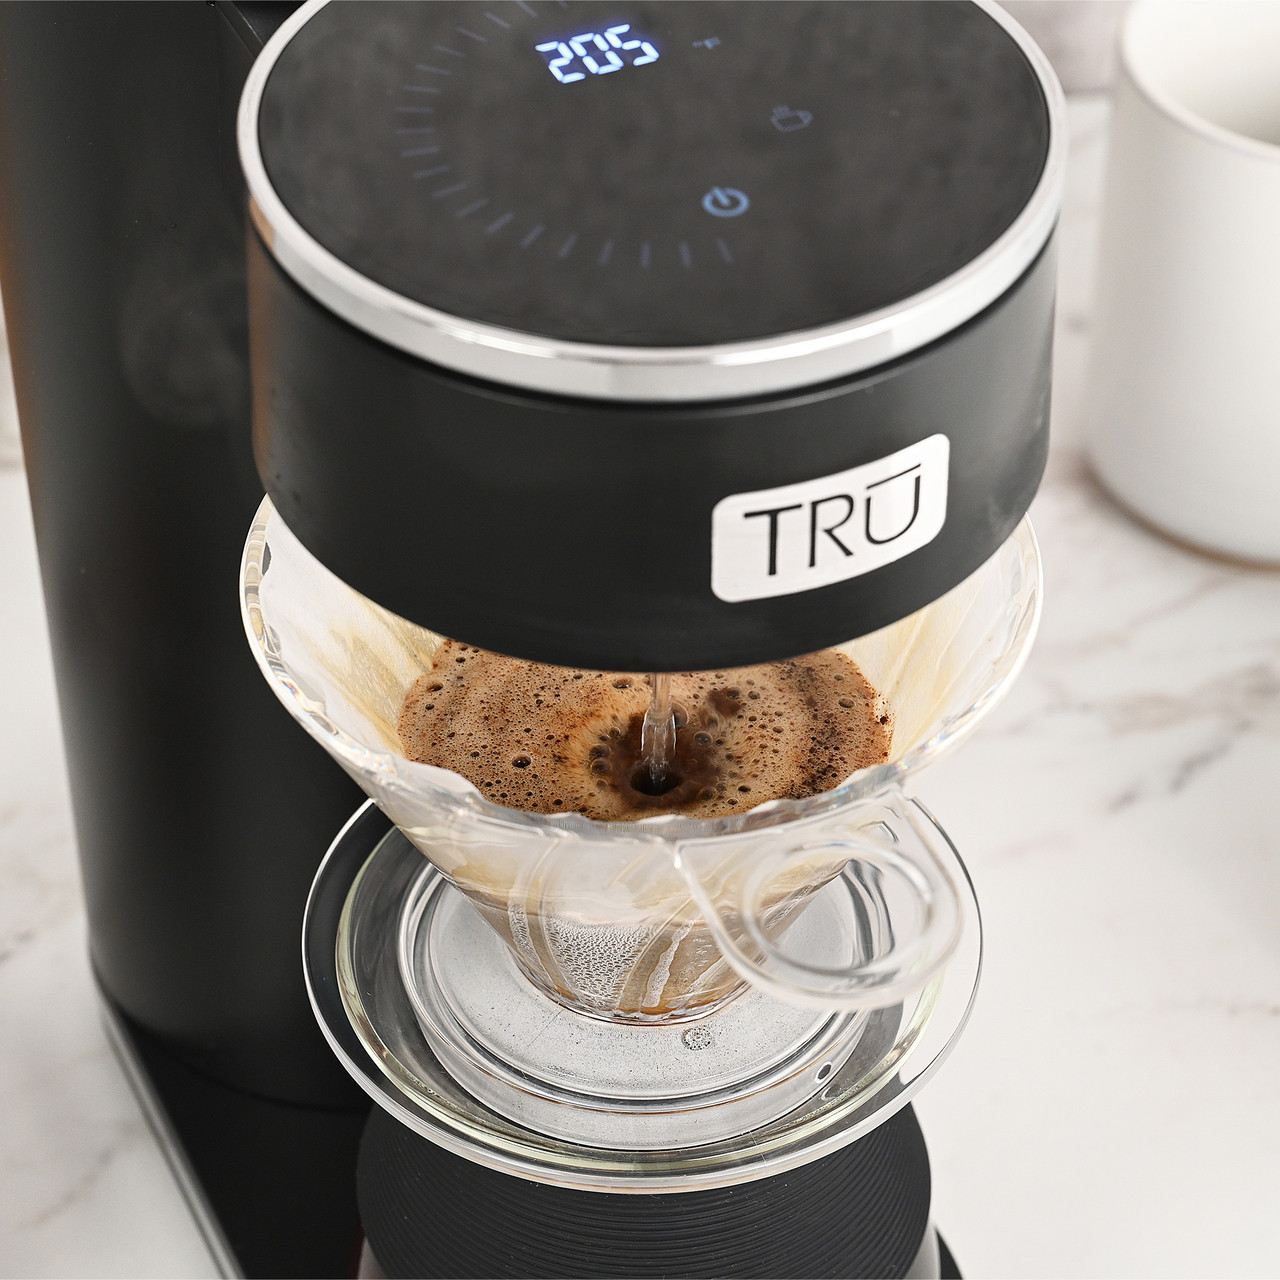 TRU Select Single Cup Brewer & Reviews